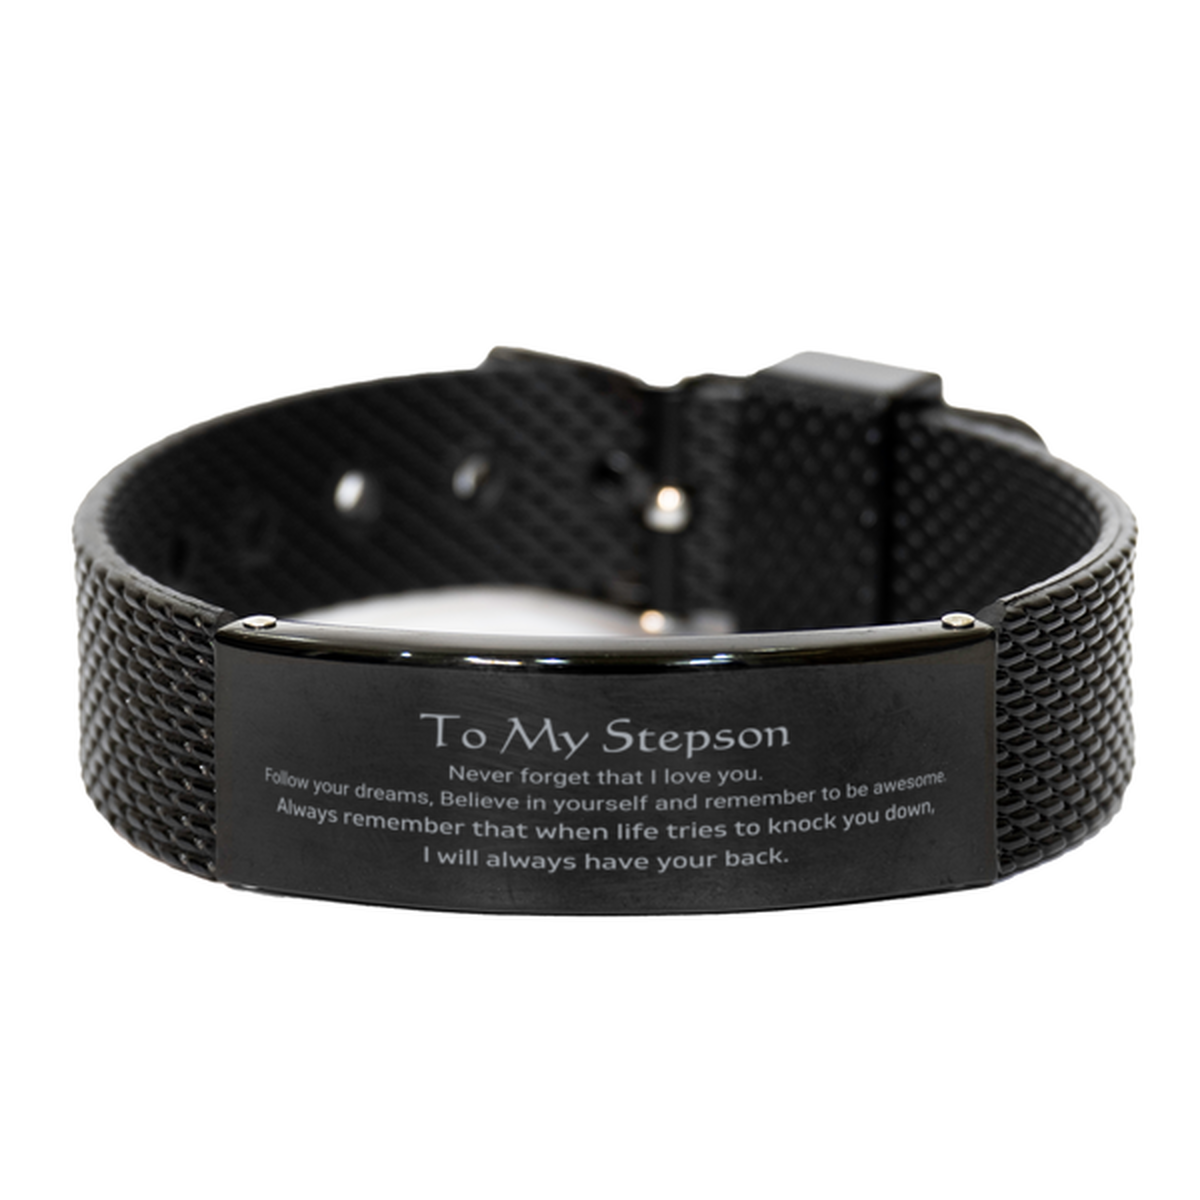 Inspirational Gifts for Stepson, Follow your dreams, Believe in yourself, Stepson Black Shark Mesh Bracelet, Birthday Christmas Unique Gifts For Stepson